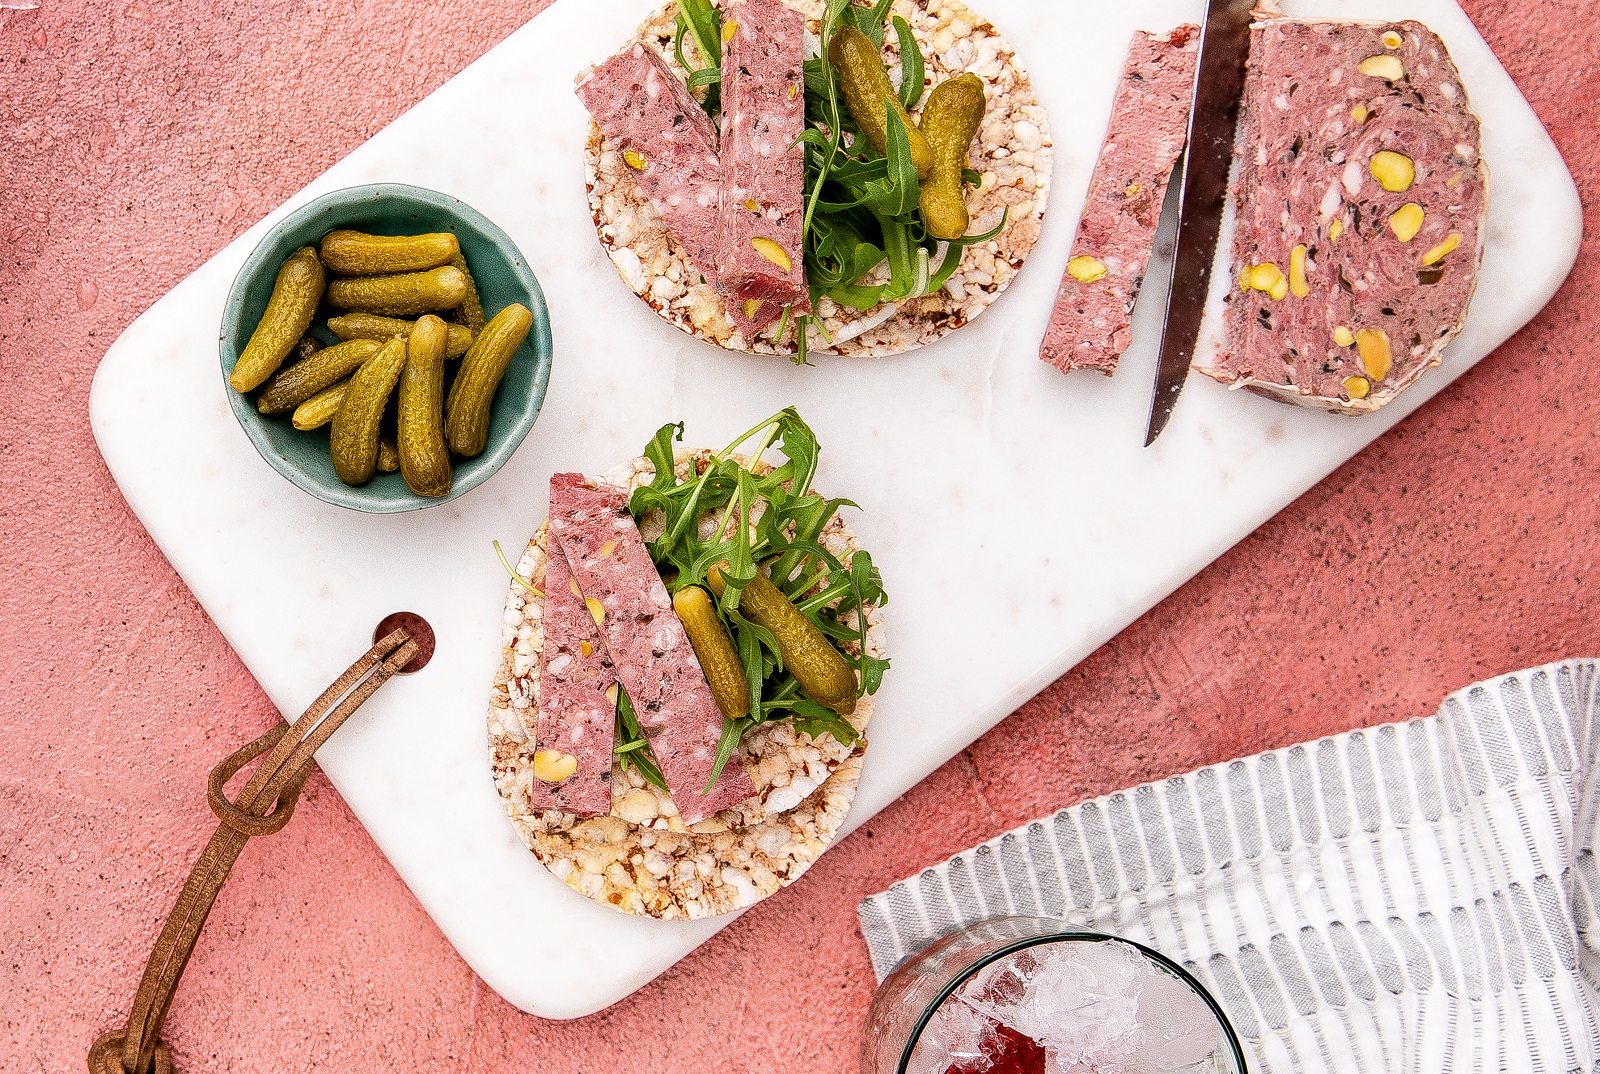 Terrine, Rocket & Cornichons for lunch on Corn Thins slices